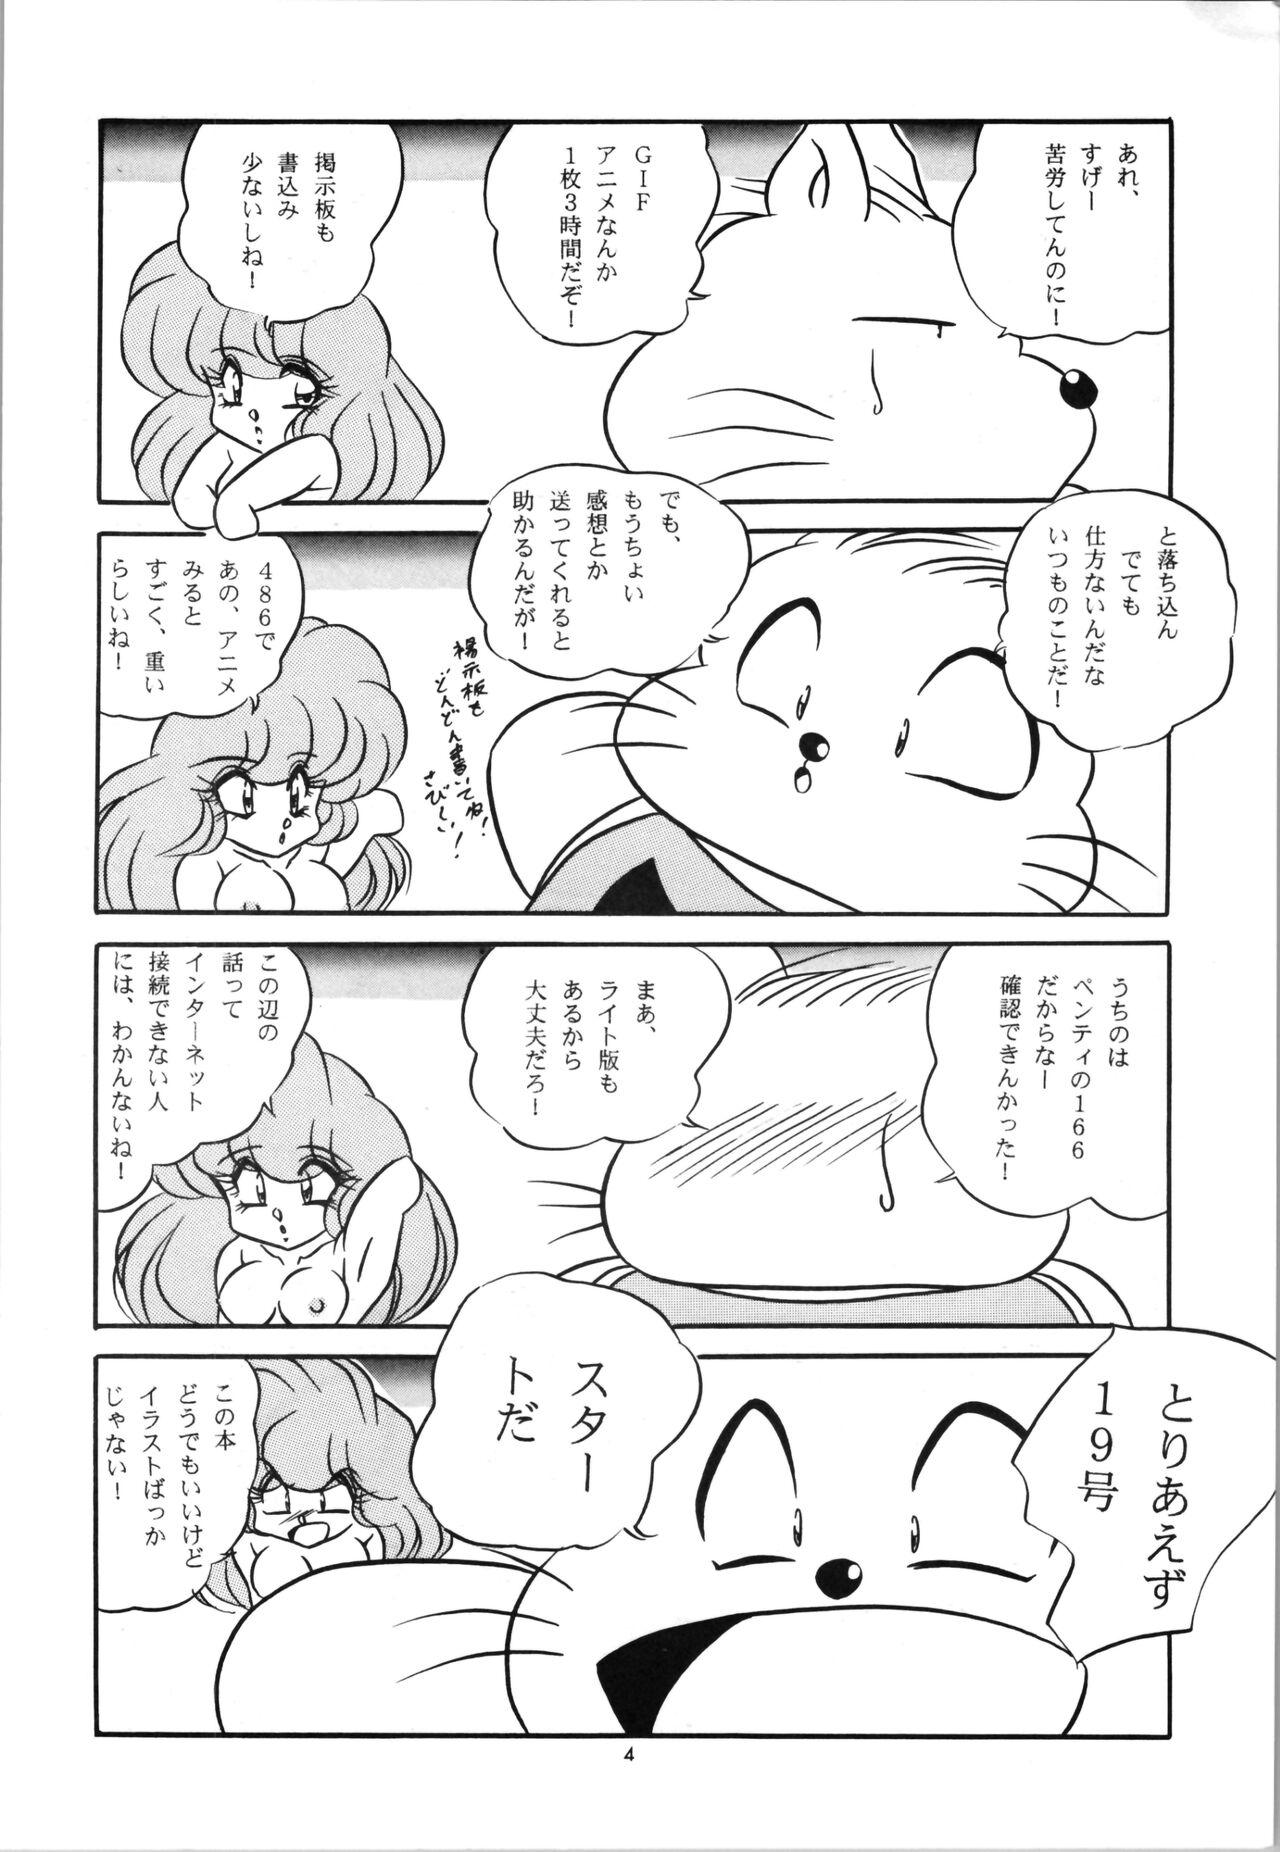 Butt C-COMPANY SPECIAL STAGE 19 - Ranma 12 Cameltoe - Page 6